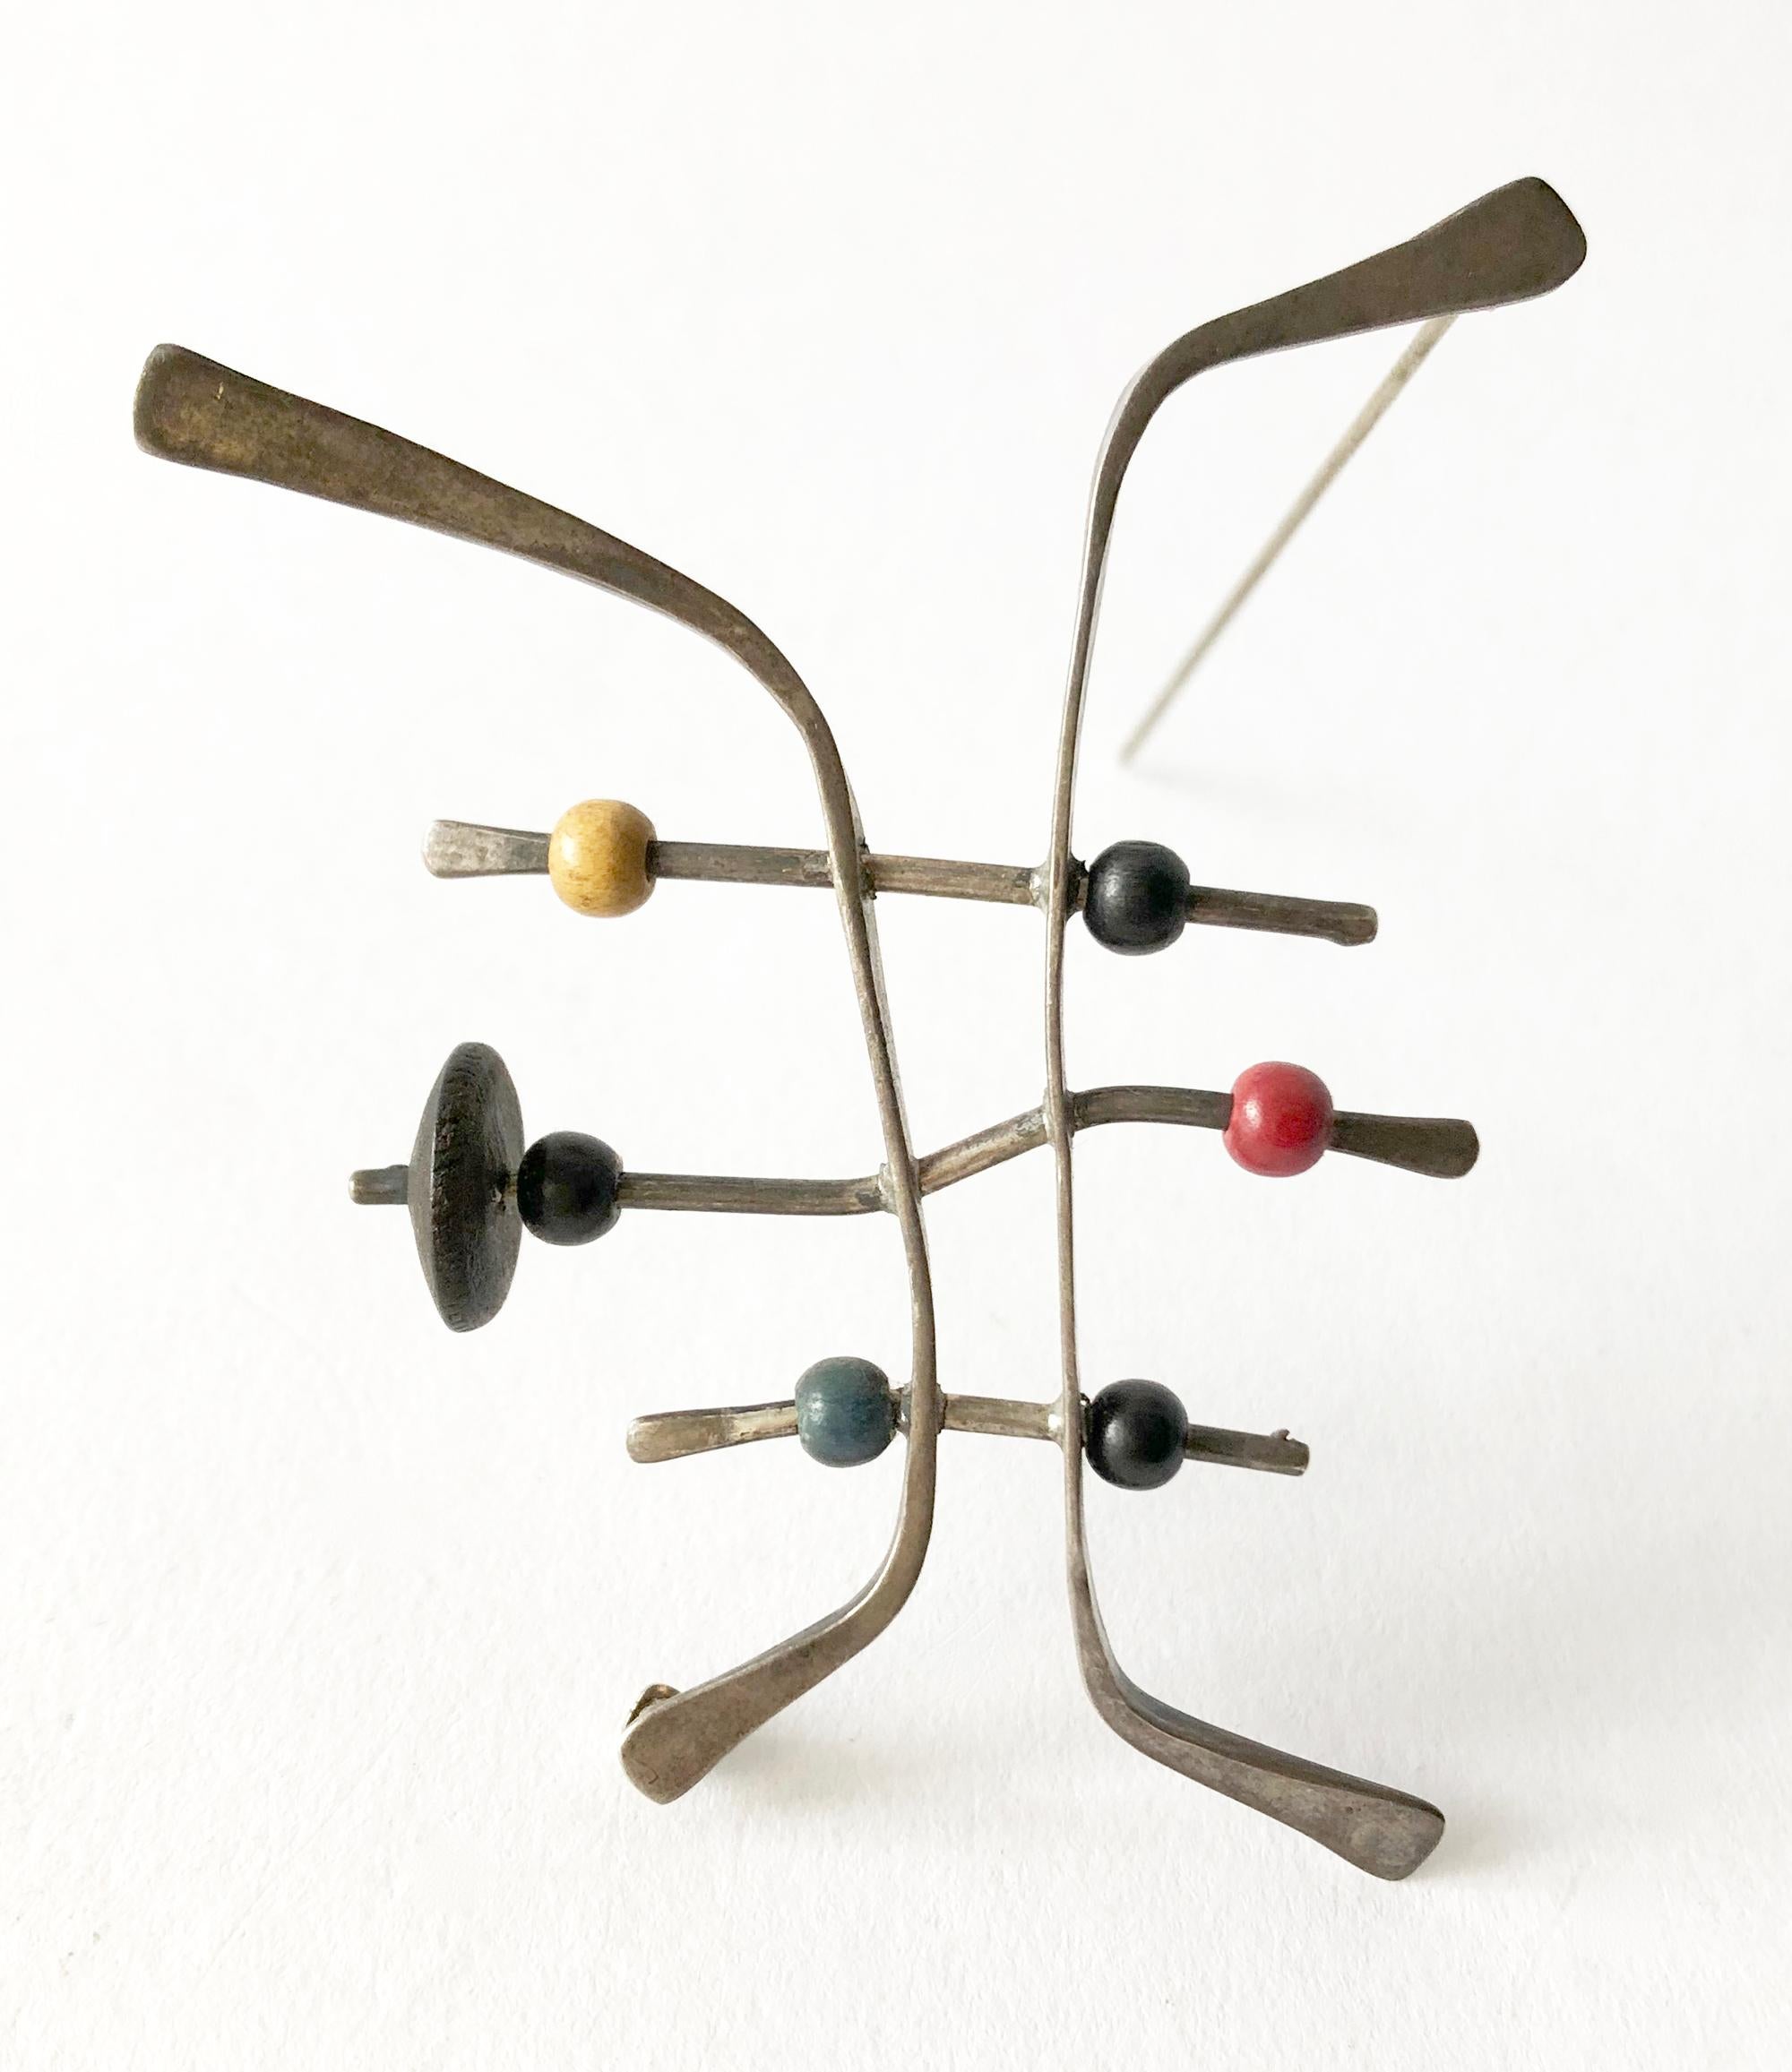 American modernist sterling silver brooch with wood beads, created by Ed Levin.  Brooch measures 2.25